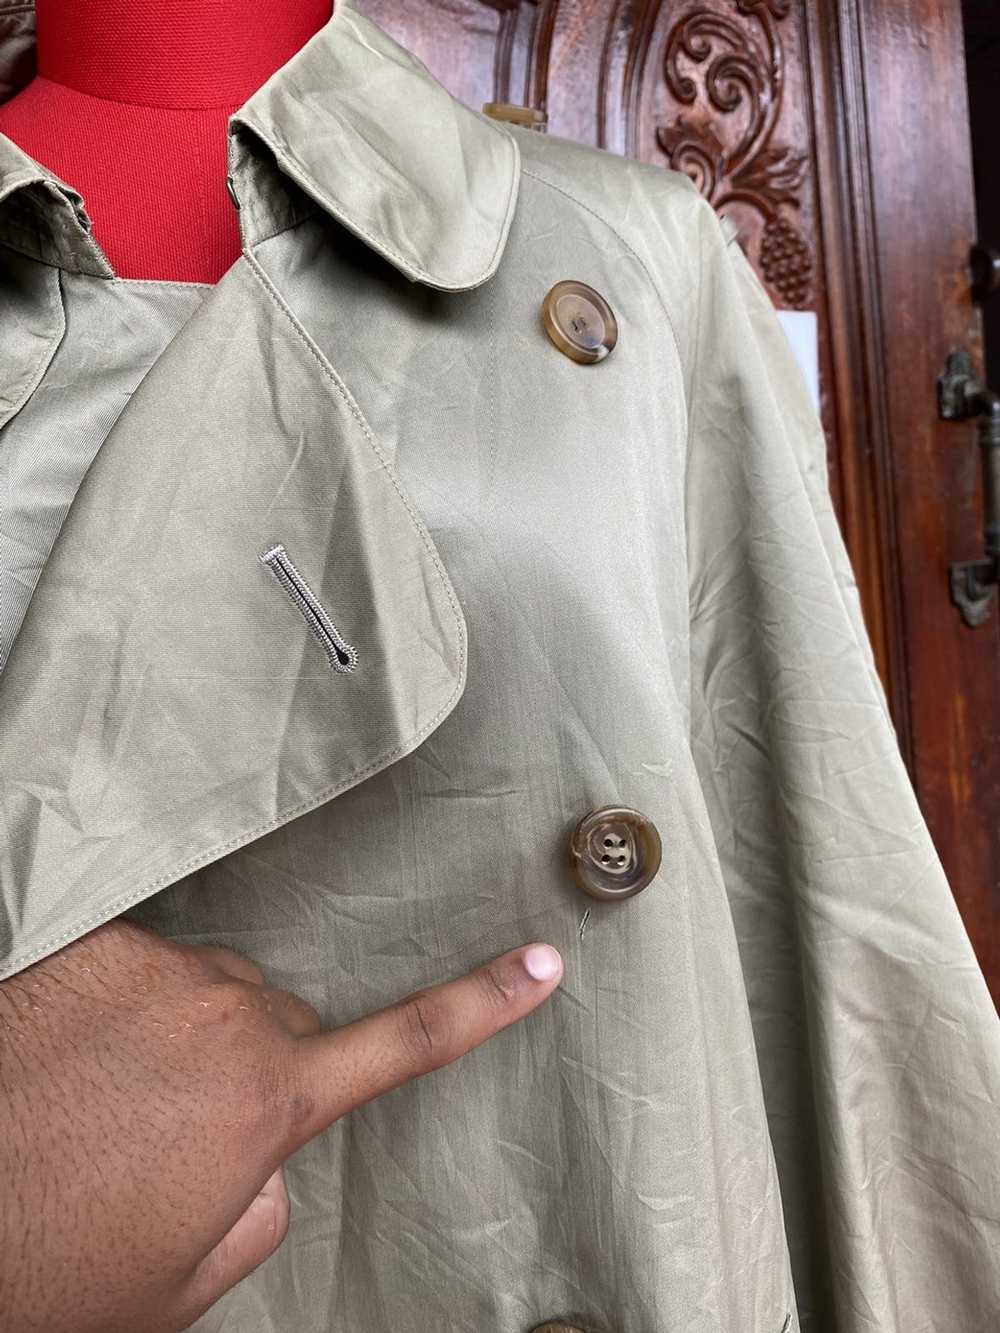 Burberry RARE VINTAGE BURBERRY TRENCH COAT - image 9